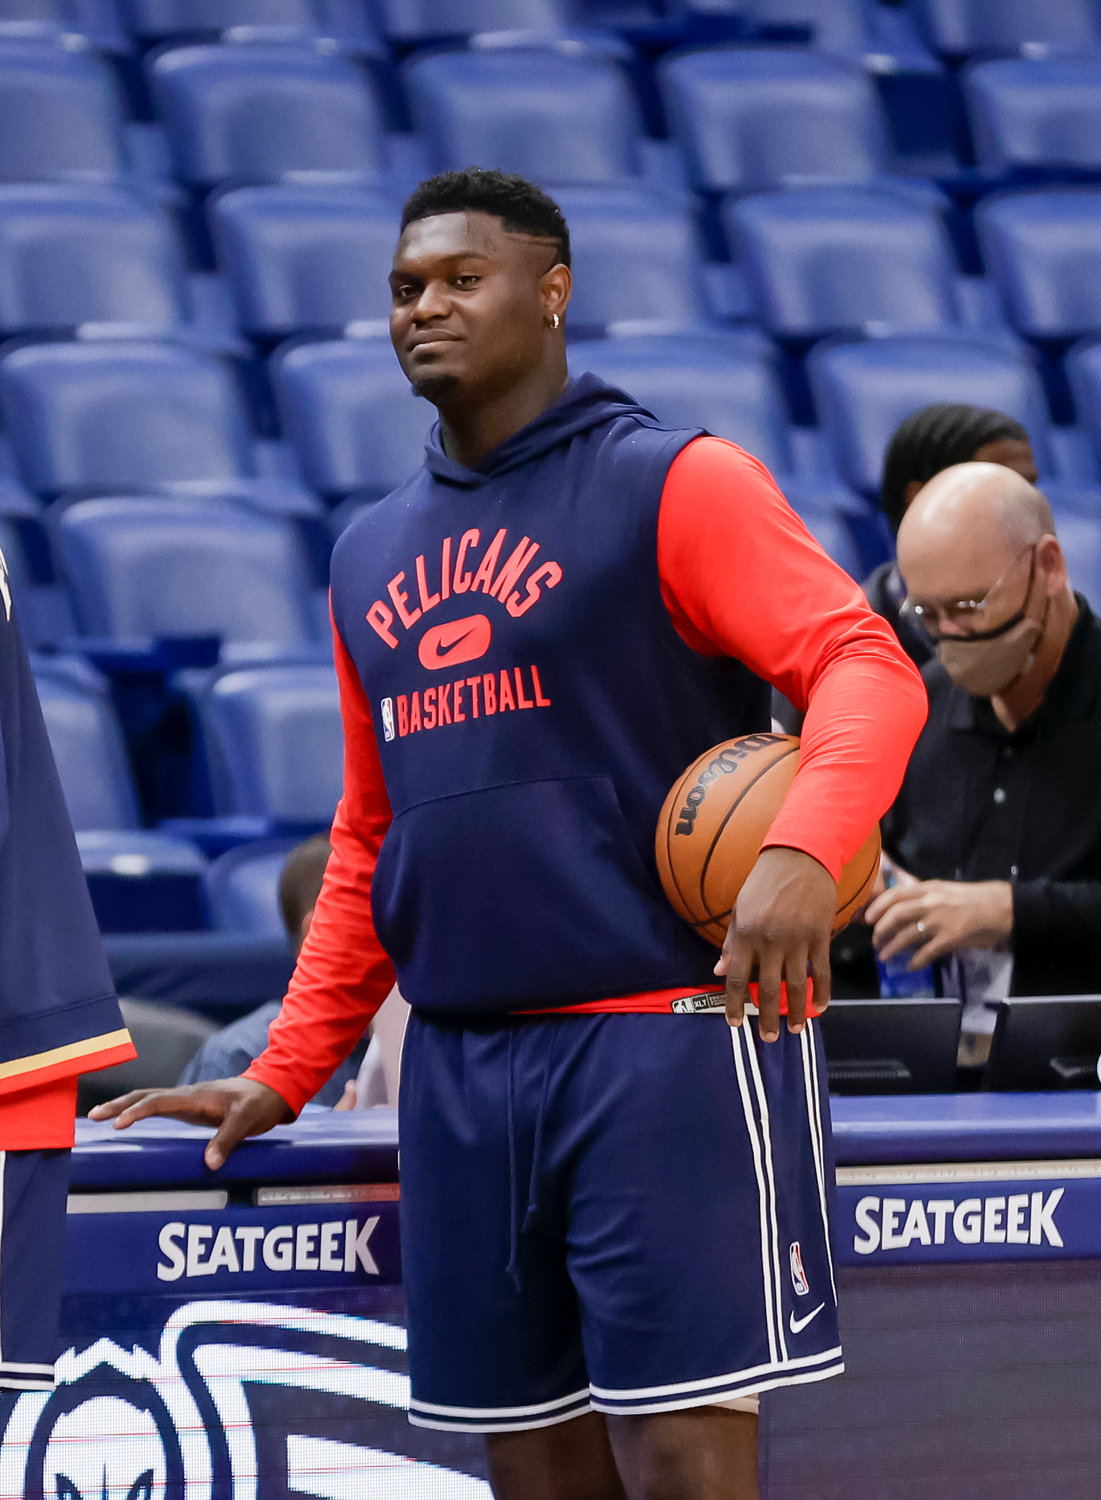 CLEARED FOR ACTION — New Orleans Pelicans forward Zion Williamson (1) stands out on the court during warm ups before the tip off of an NBA game against the New York Knicks in New Orleans, Saturday, Oct. 30. Williamson has been cleared for full team work at practice.